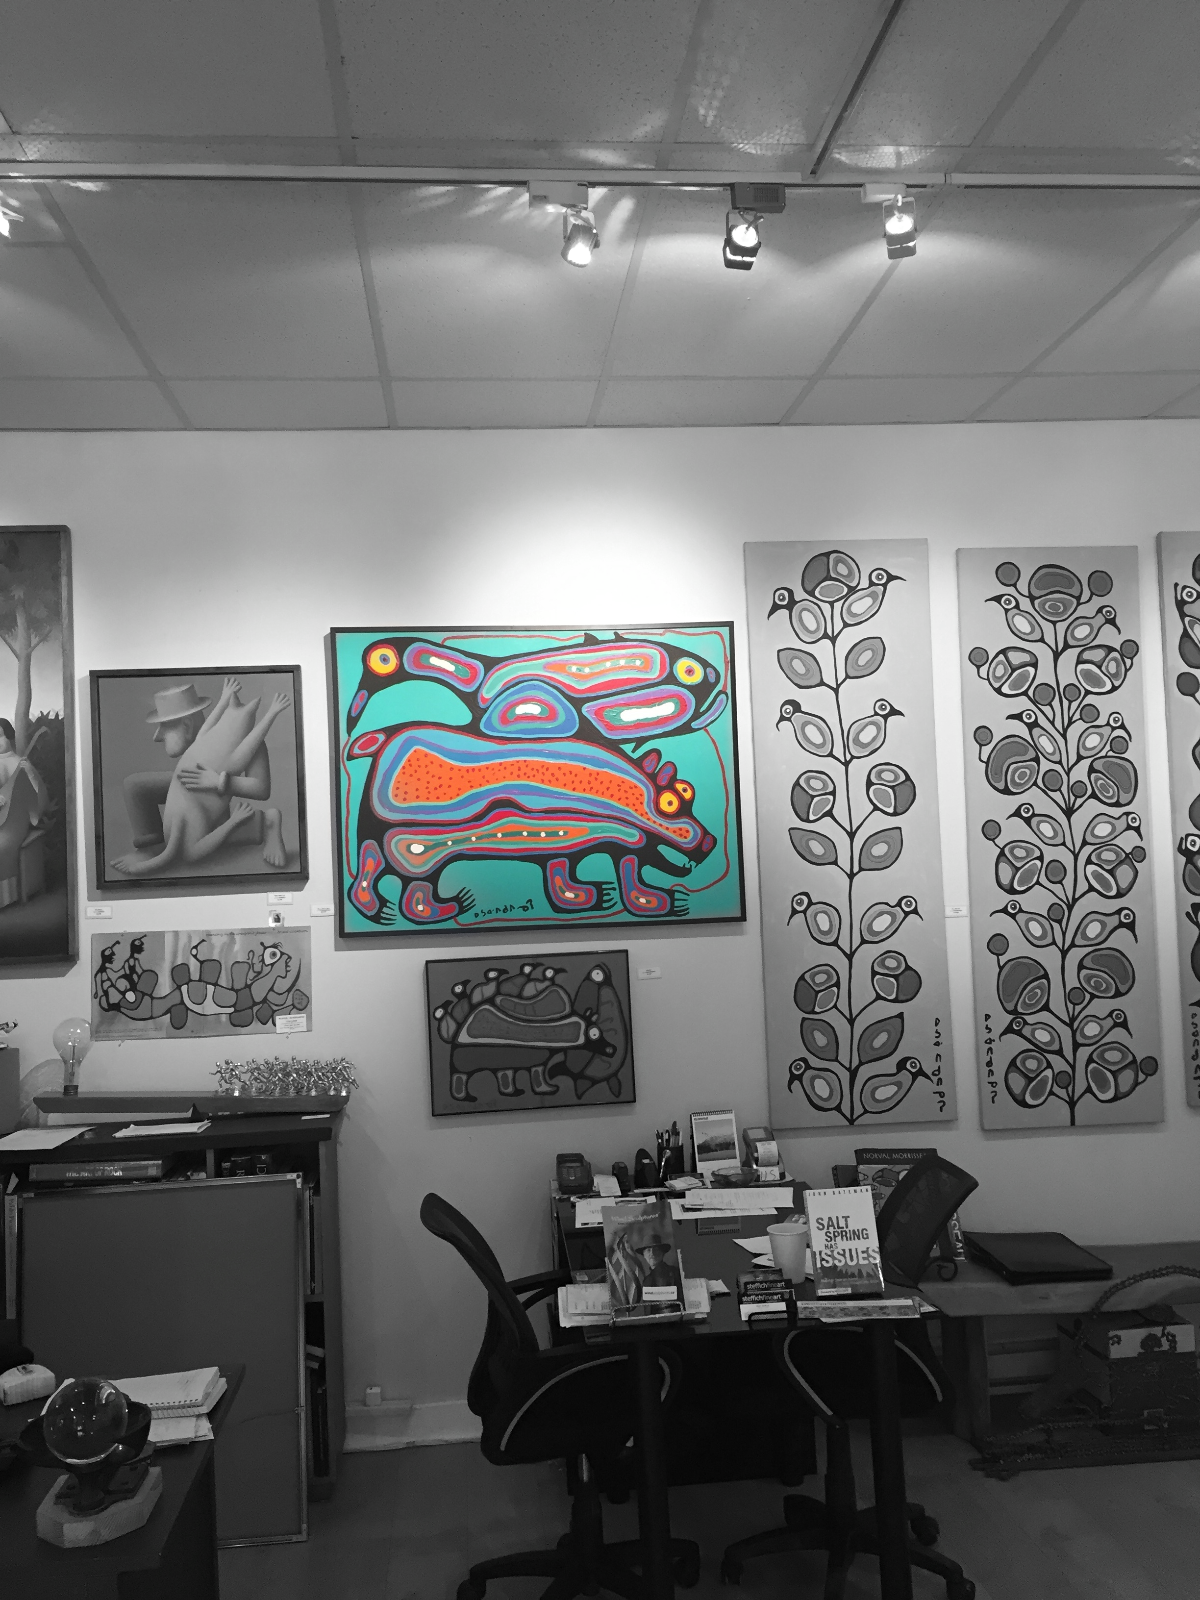 Original norval morrisseau painting called bear, fish and bird with gallery in background